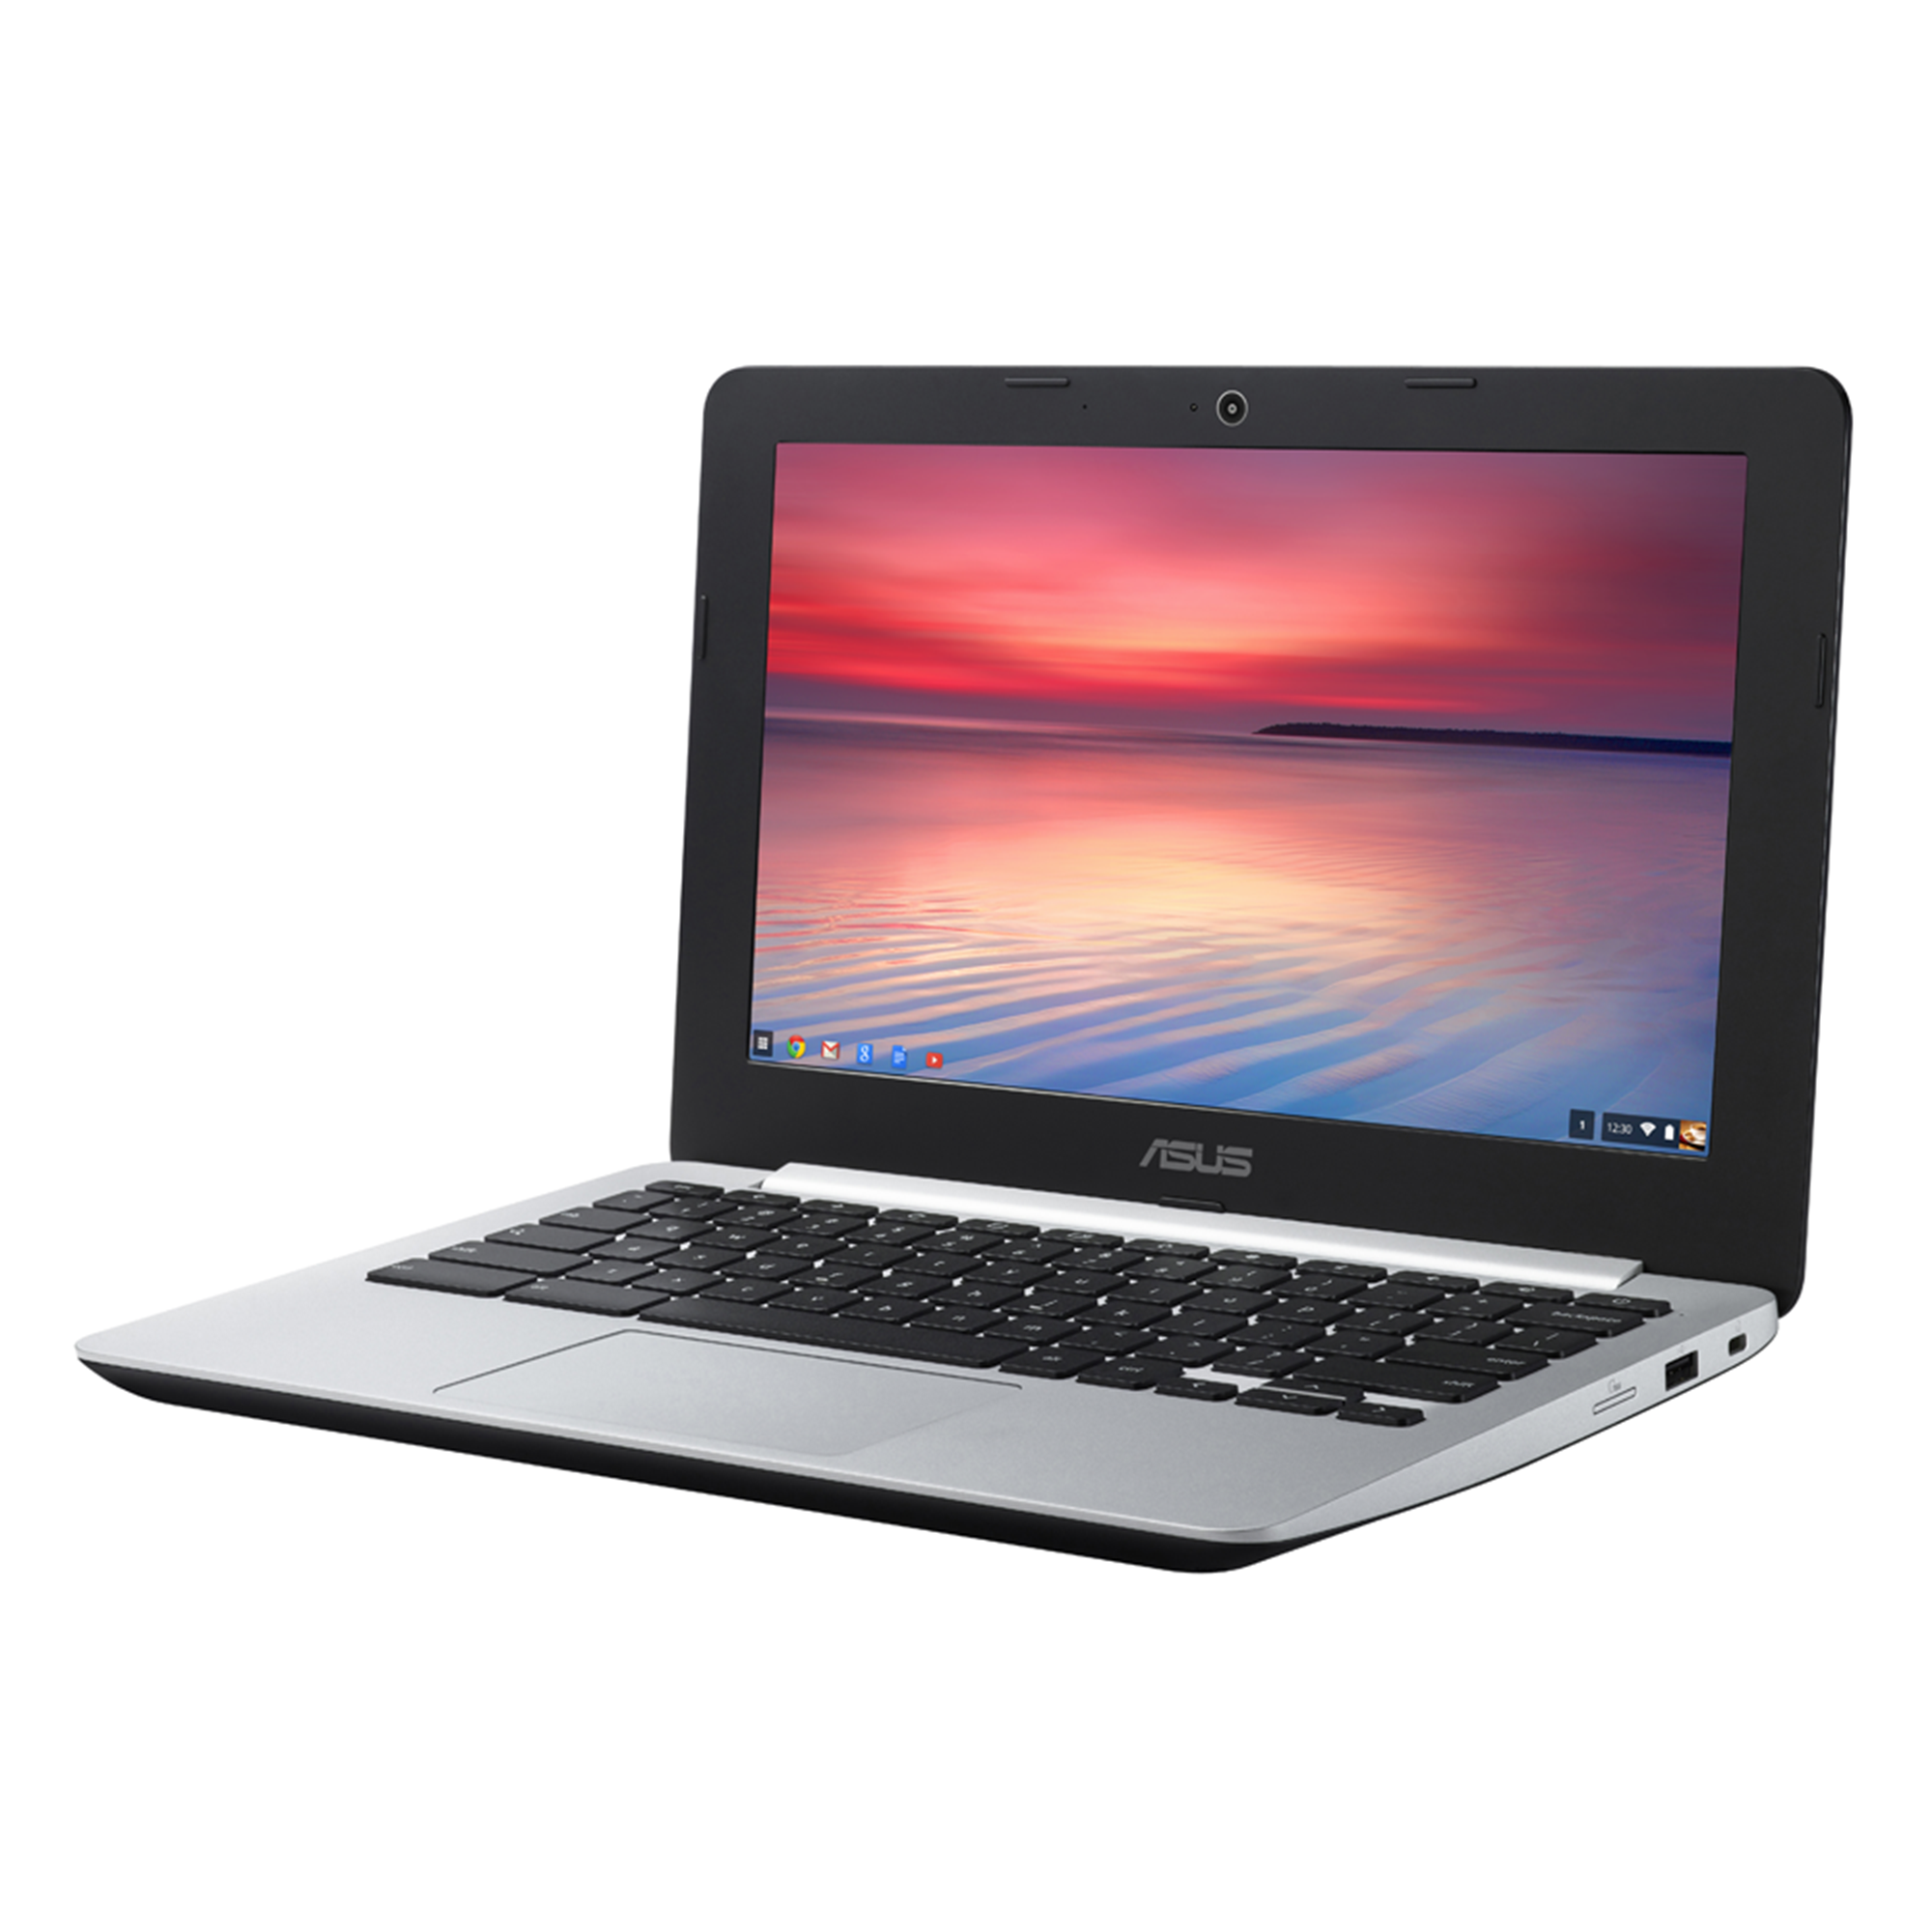 ASUS Chromebook C200｜Laptops For Students｜ASUS Global